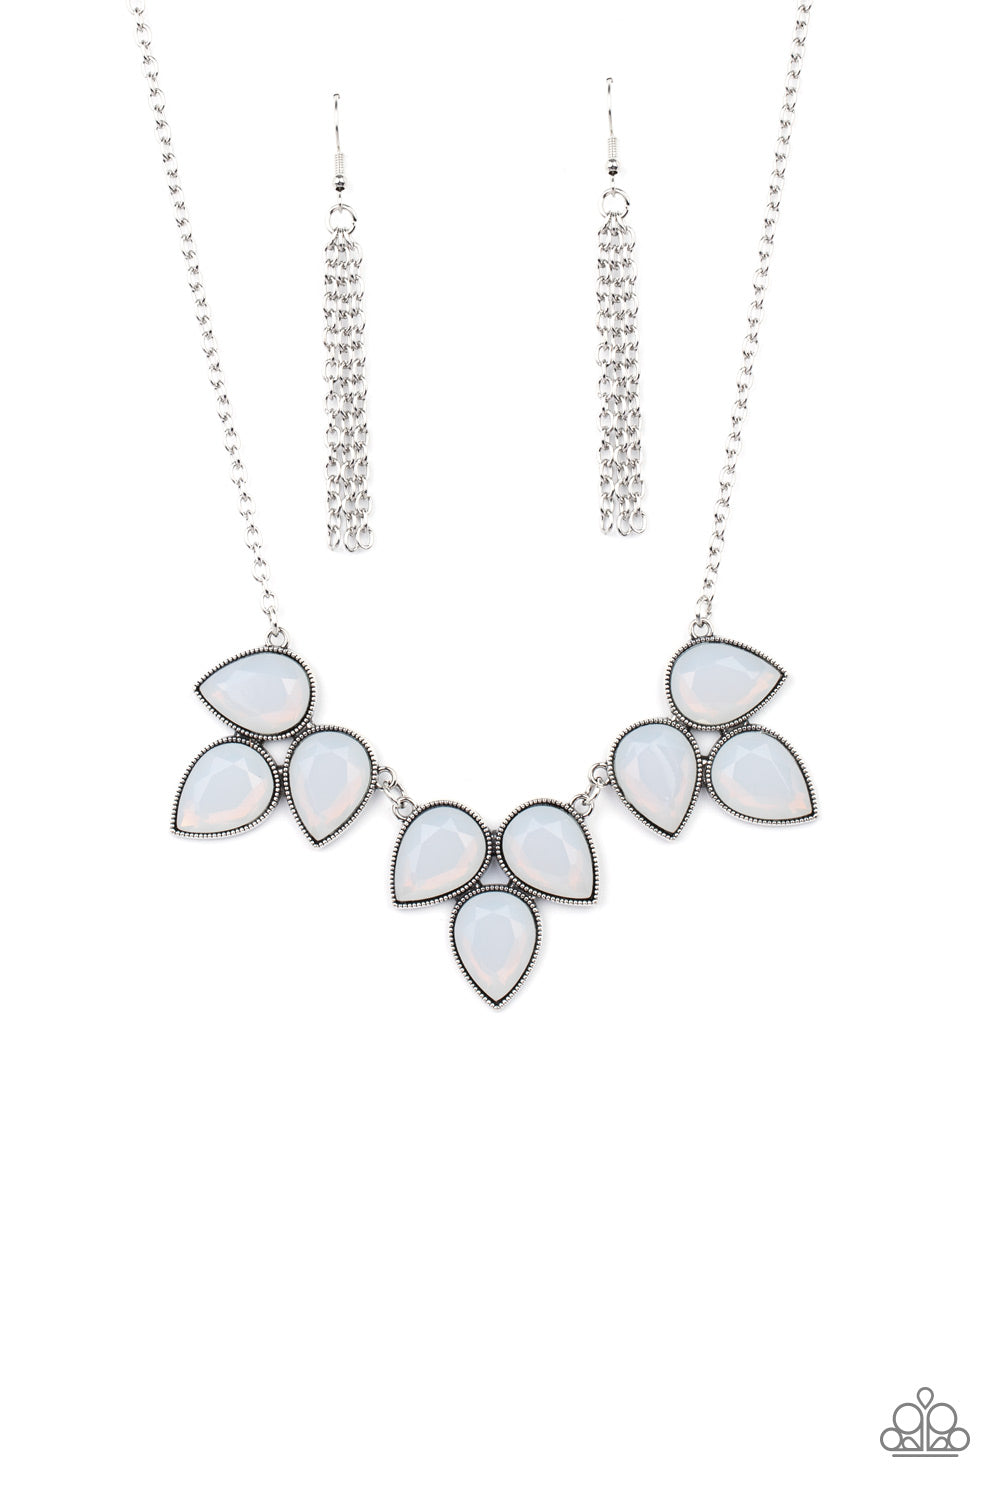 Prairie Fairytale White Necklace - Paparazzi Accessories  Trios of faceted dewy white teardrop beads encased in studded antiqued silver casings coalesce into leafy frames that delicately link into an ethereal fringe below the collar. Features an adjustable clasp closure.  All Paparazzi Accessories are lead free and nickel free!  Sold as one individual necklace. Includes one pair of matching earrings.